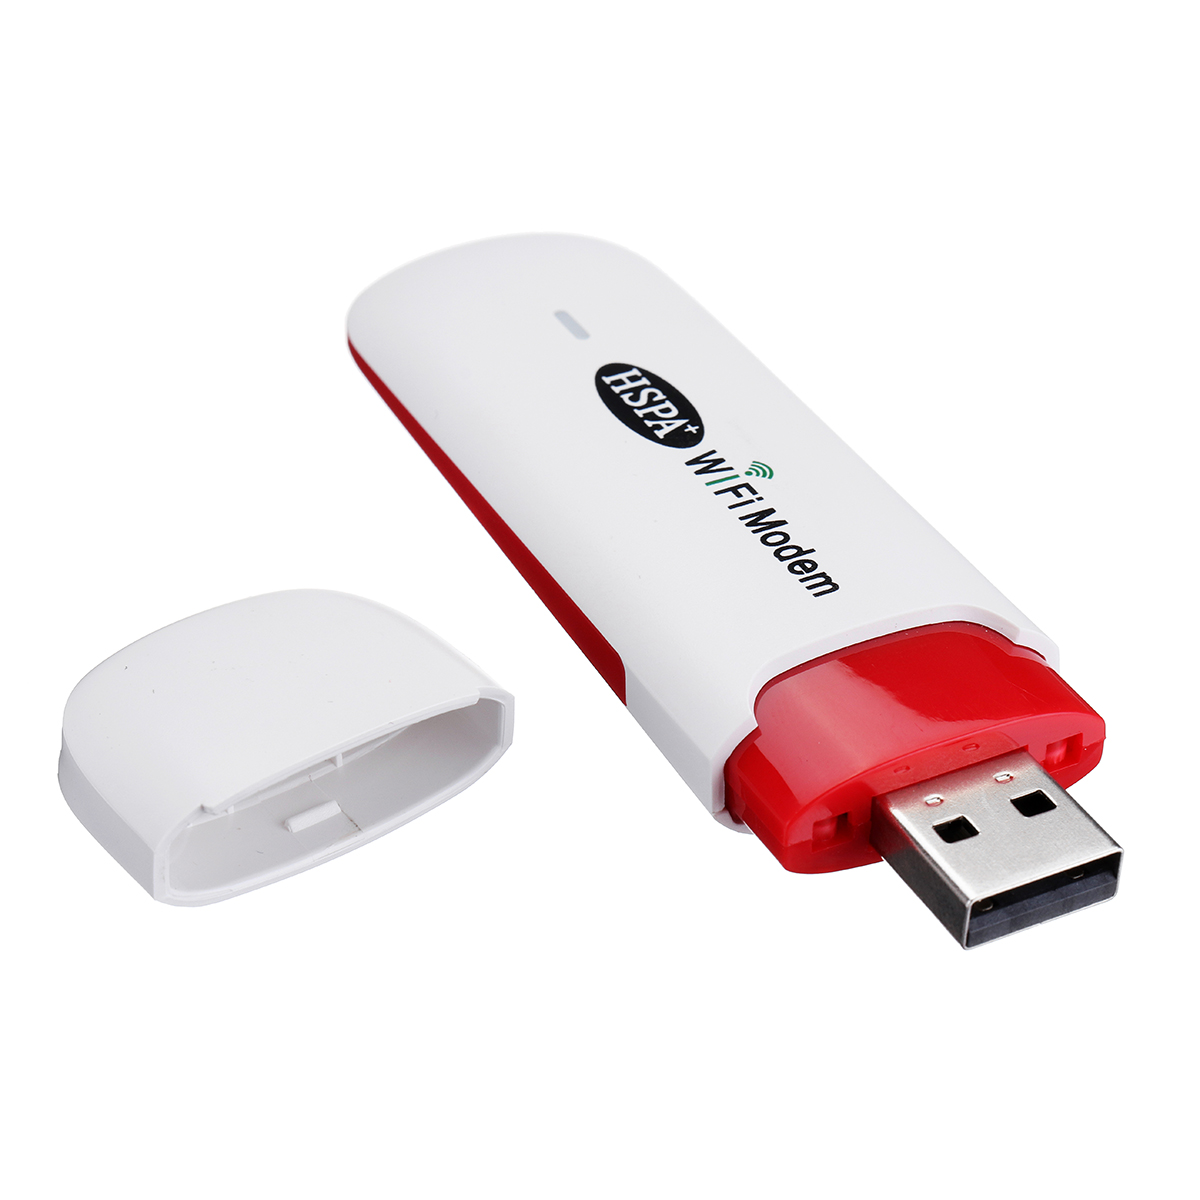 

3G LTE USB 2.0 Wireless Hotspot Mobile WIFI Dongle Router with SIM TF Card Slot for Mobile Phone Tablet